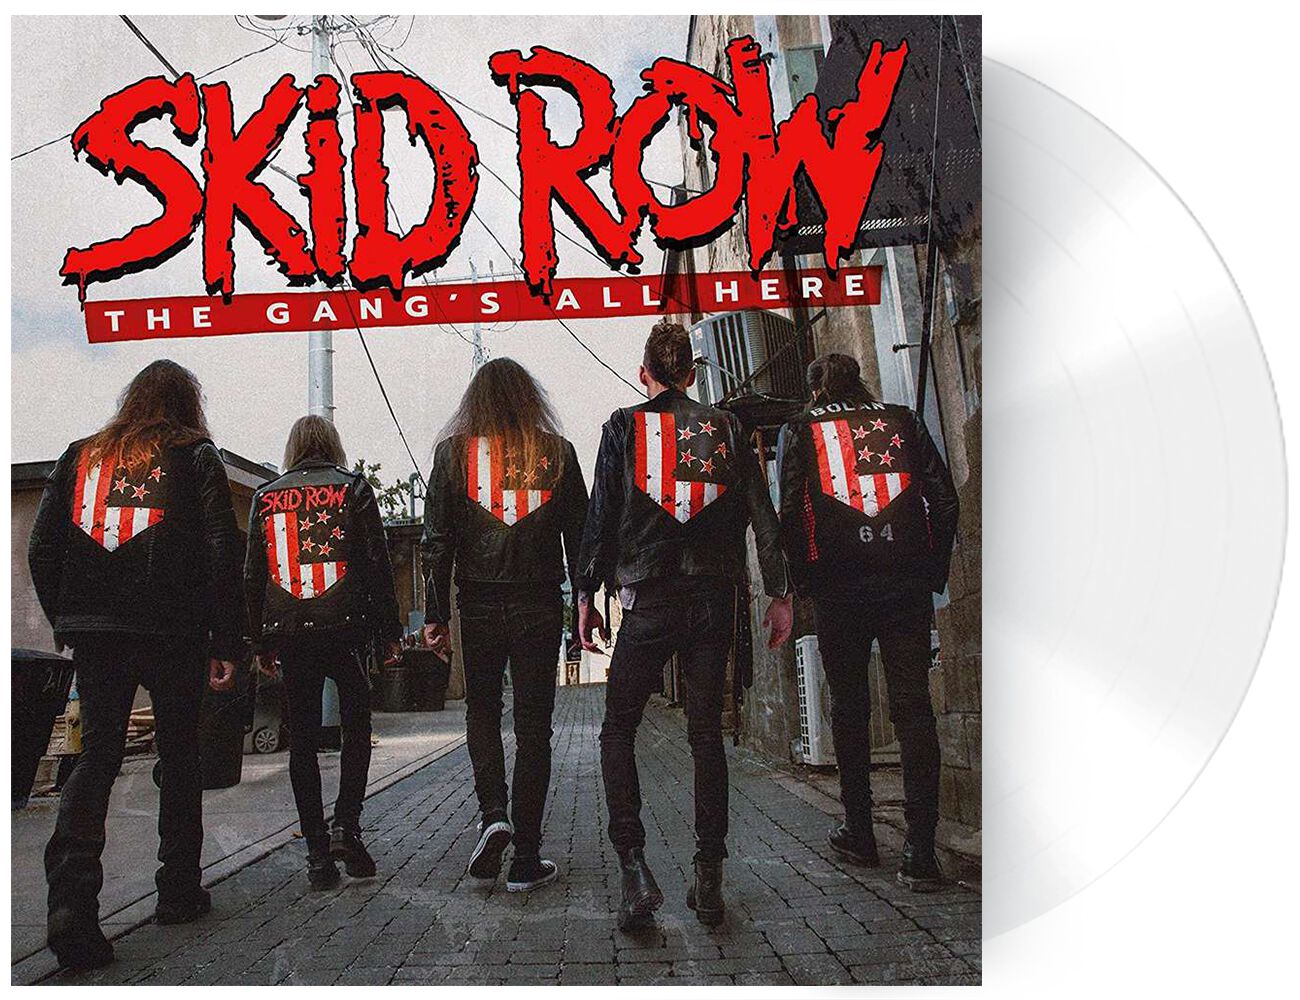 Skid Row The gang's all here LP white